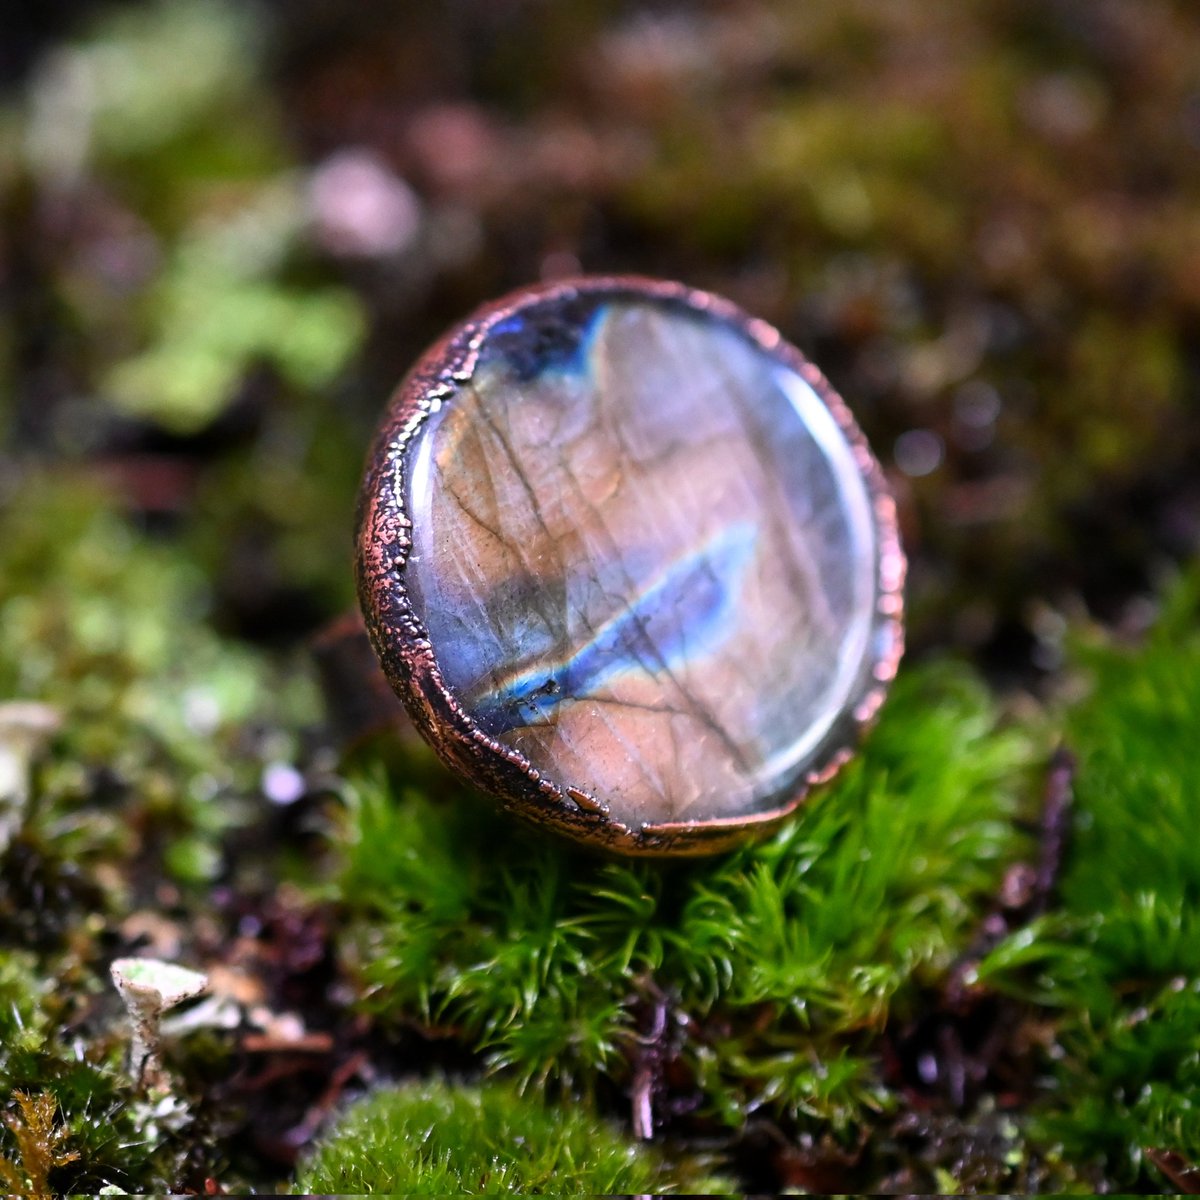 Labradorite a stone that reflects light n gorgeous shades of blue and green, round ring design is perfect for showcasing its beauty
thewackywanderers.com 
#labradorite #labradoritejewelry #fingerbling #bohostyle #bohovibes #oregonmaker #handcrafted #shopsmall #shimmerandshine